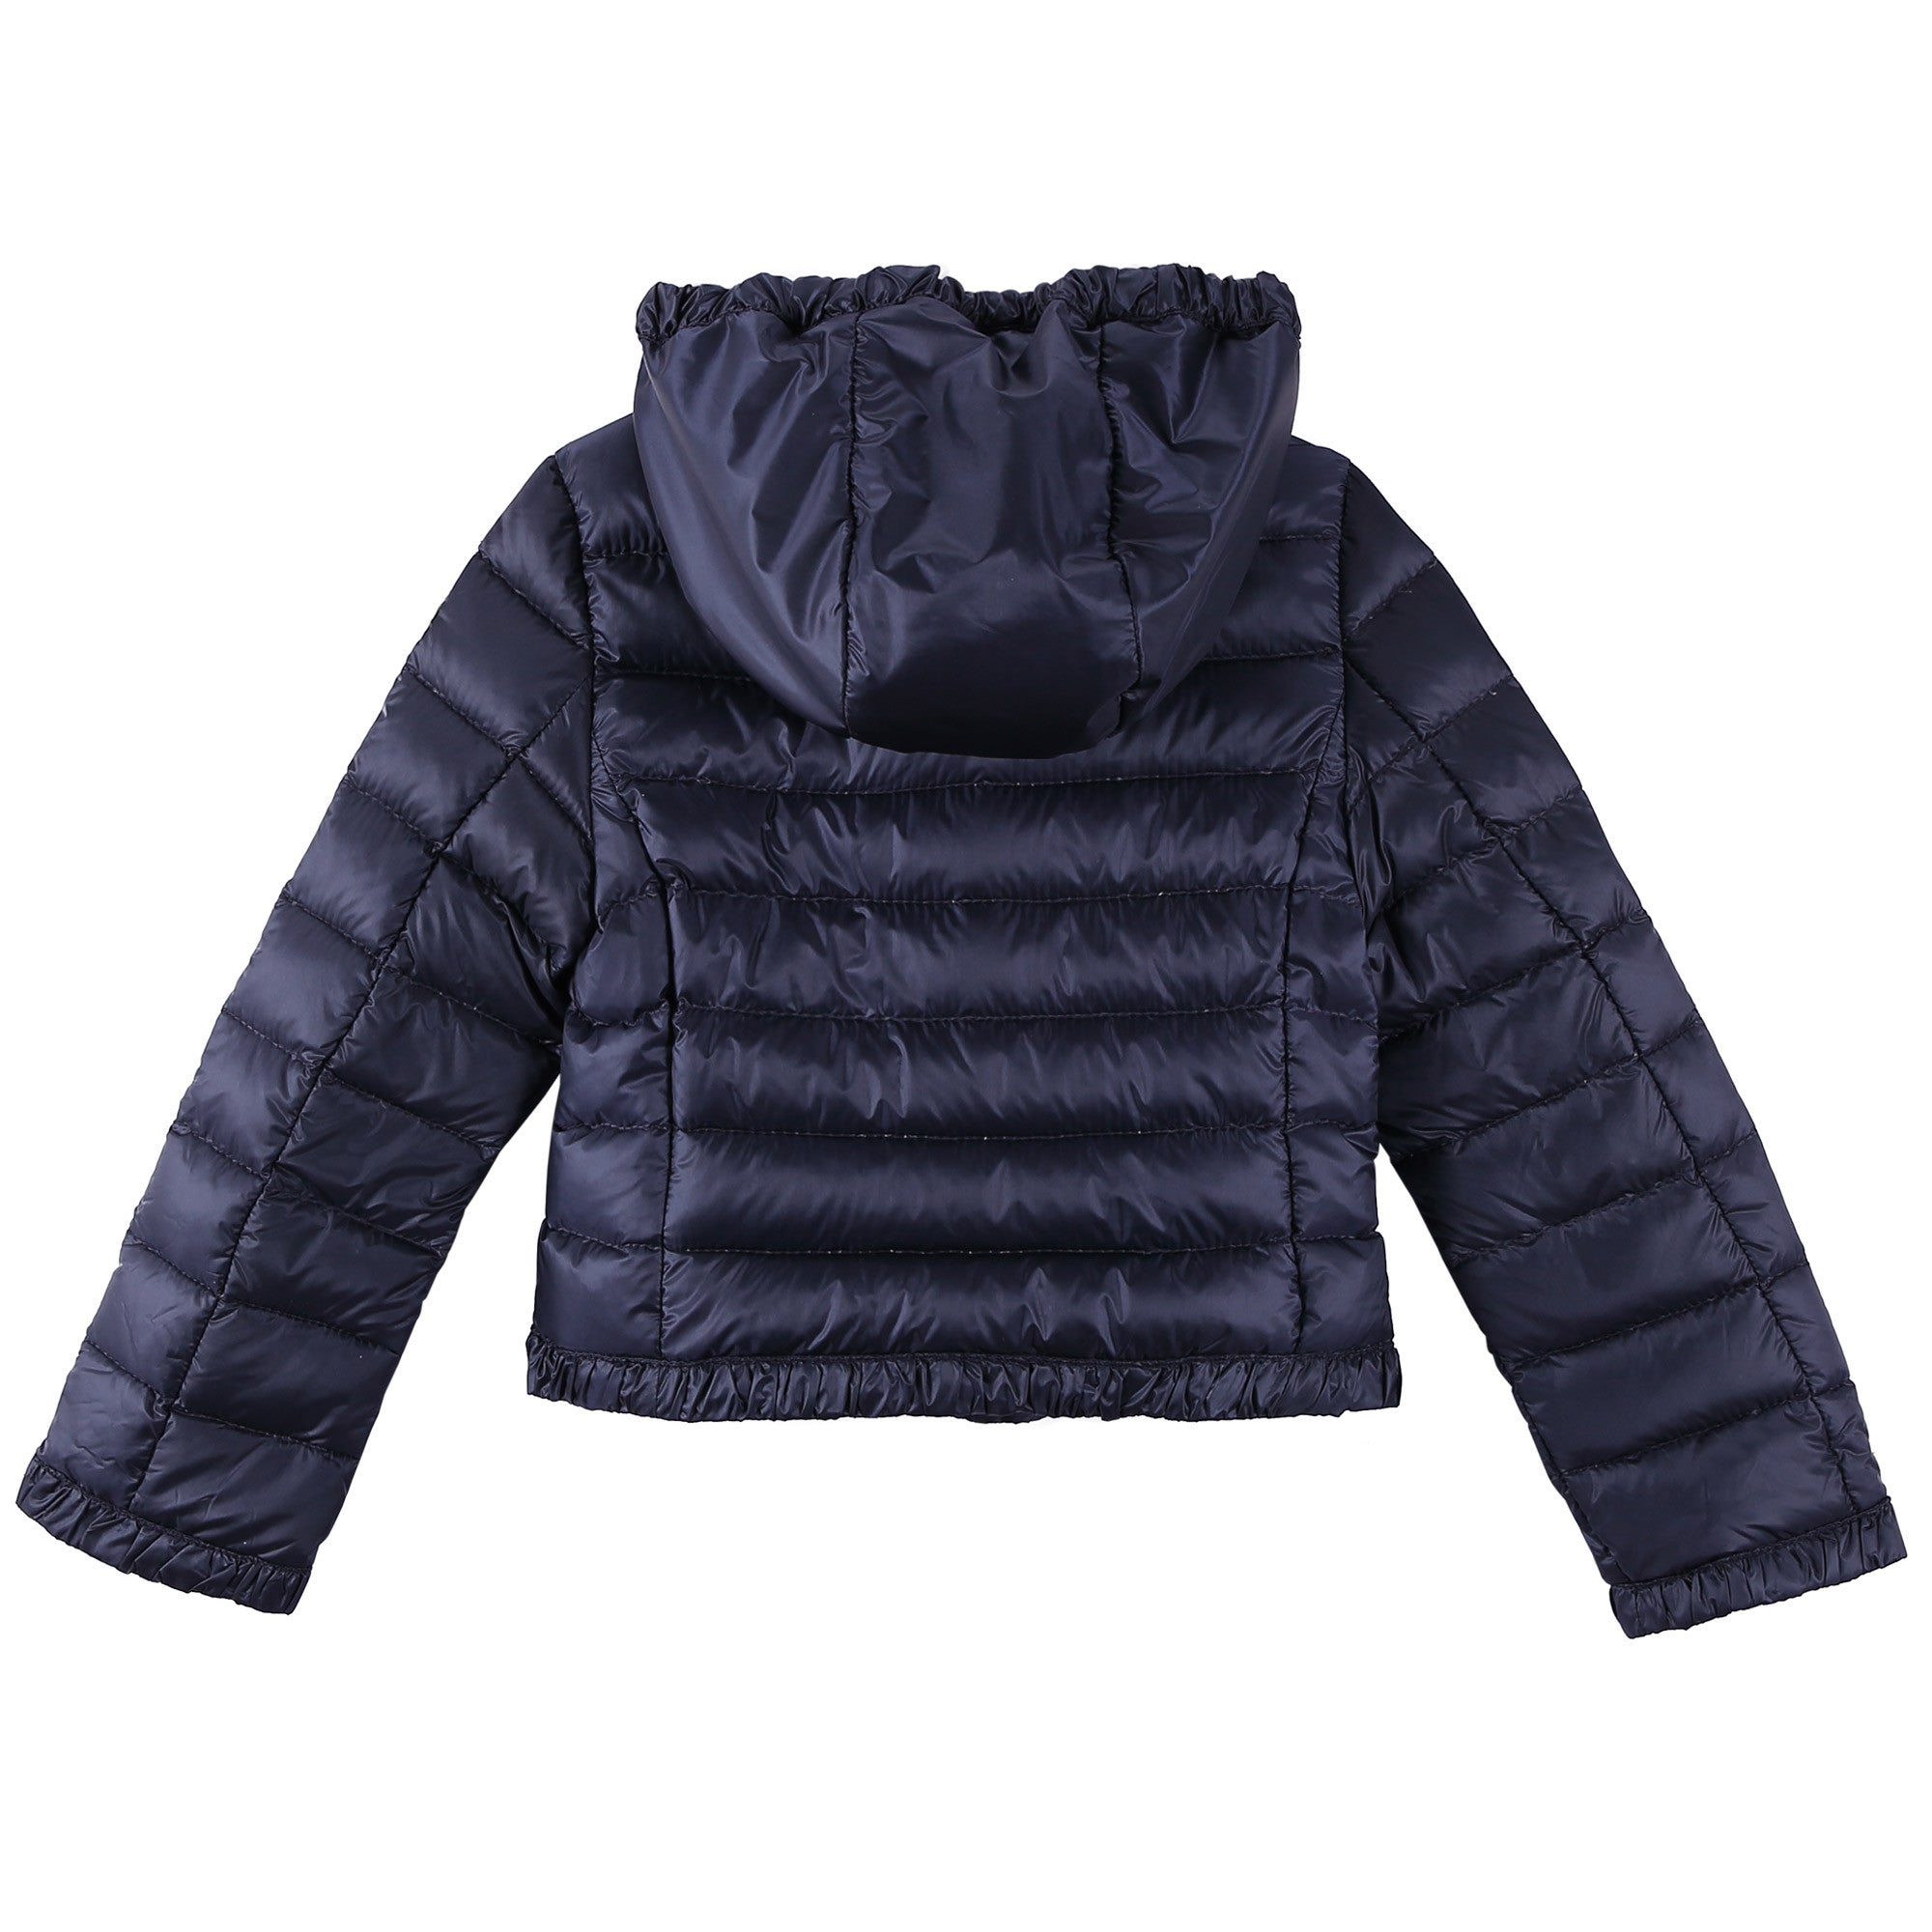 Baby Girls Navy Blue Down Padded 'Flavienne' Jacket With Frilly Cuffs - CÉMAROSE | Children's Fashion Store - 2